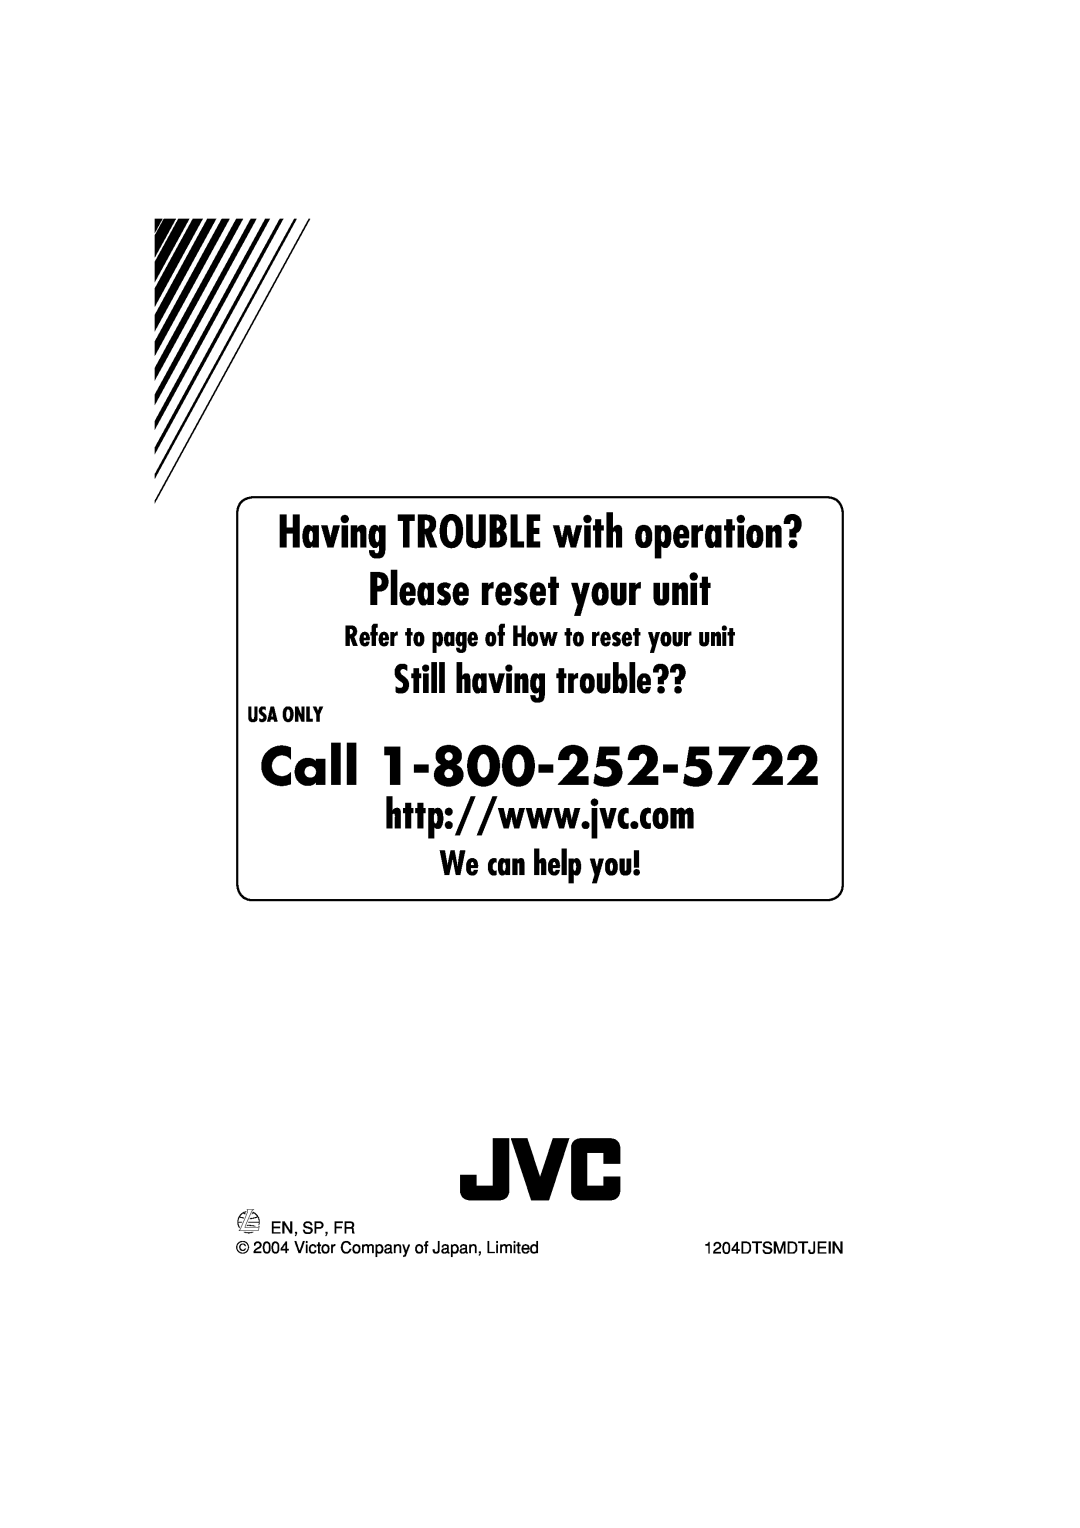 JVC KD-AR860, KD-LH810 We can help you, Refer to page of How to reset your unit, Usa Only, Call, Please reset your unit 